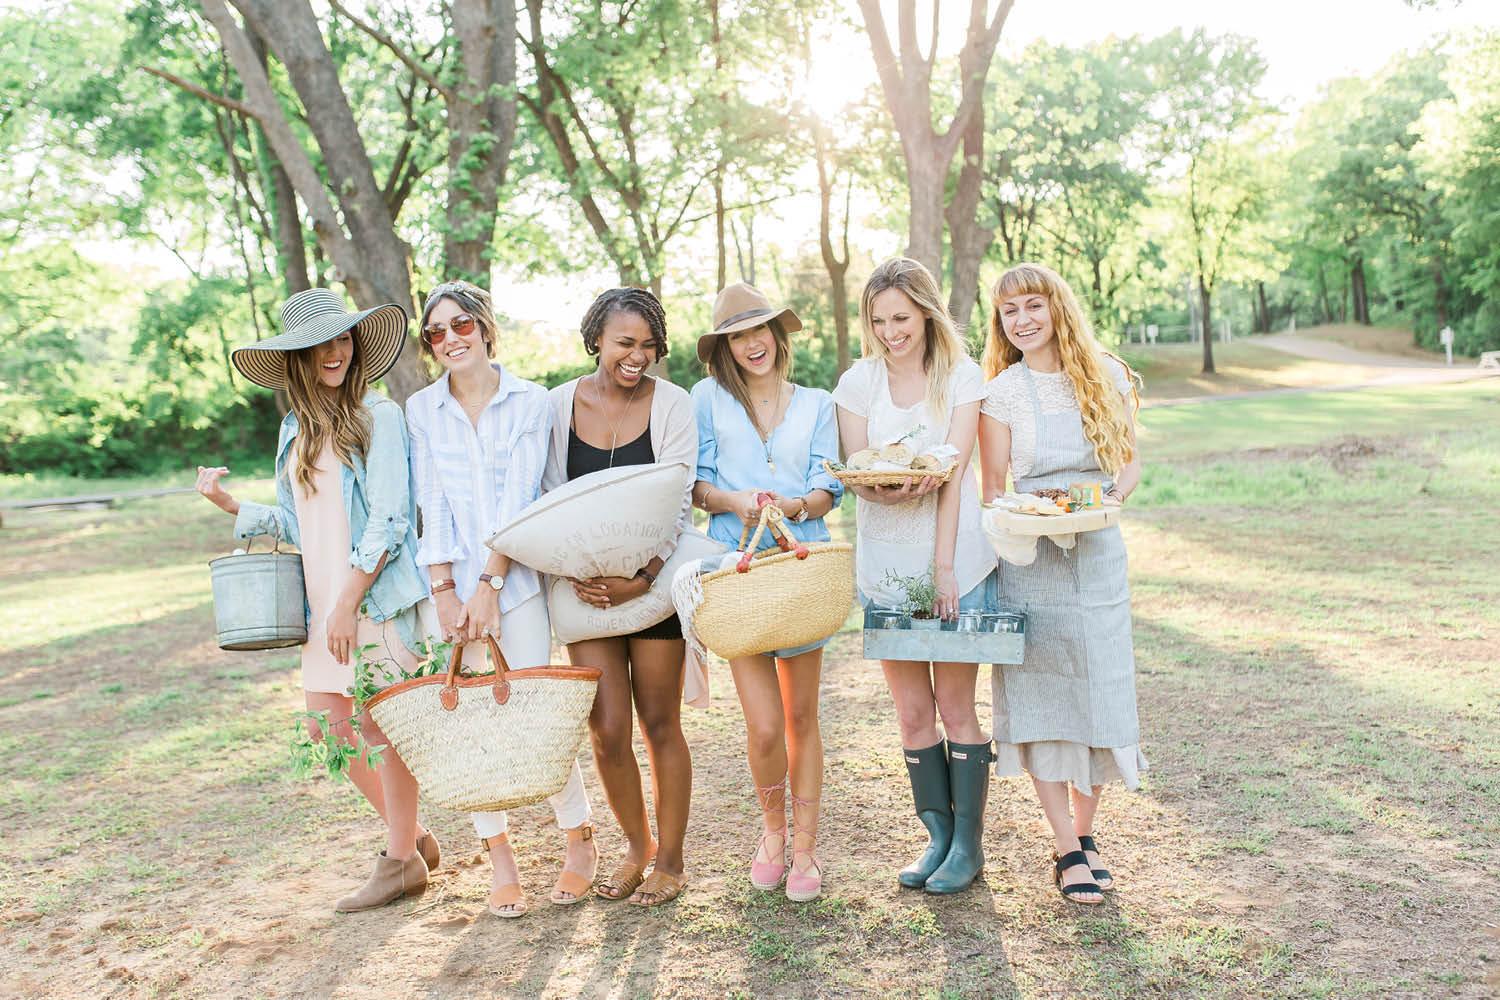 10 Interesting Tips About How To Dress For A Picnic